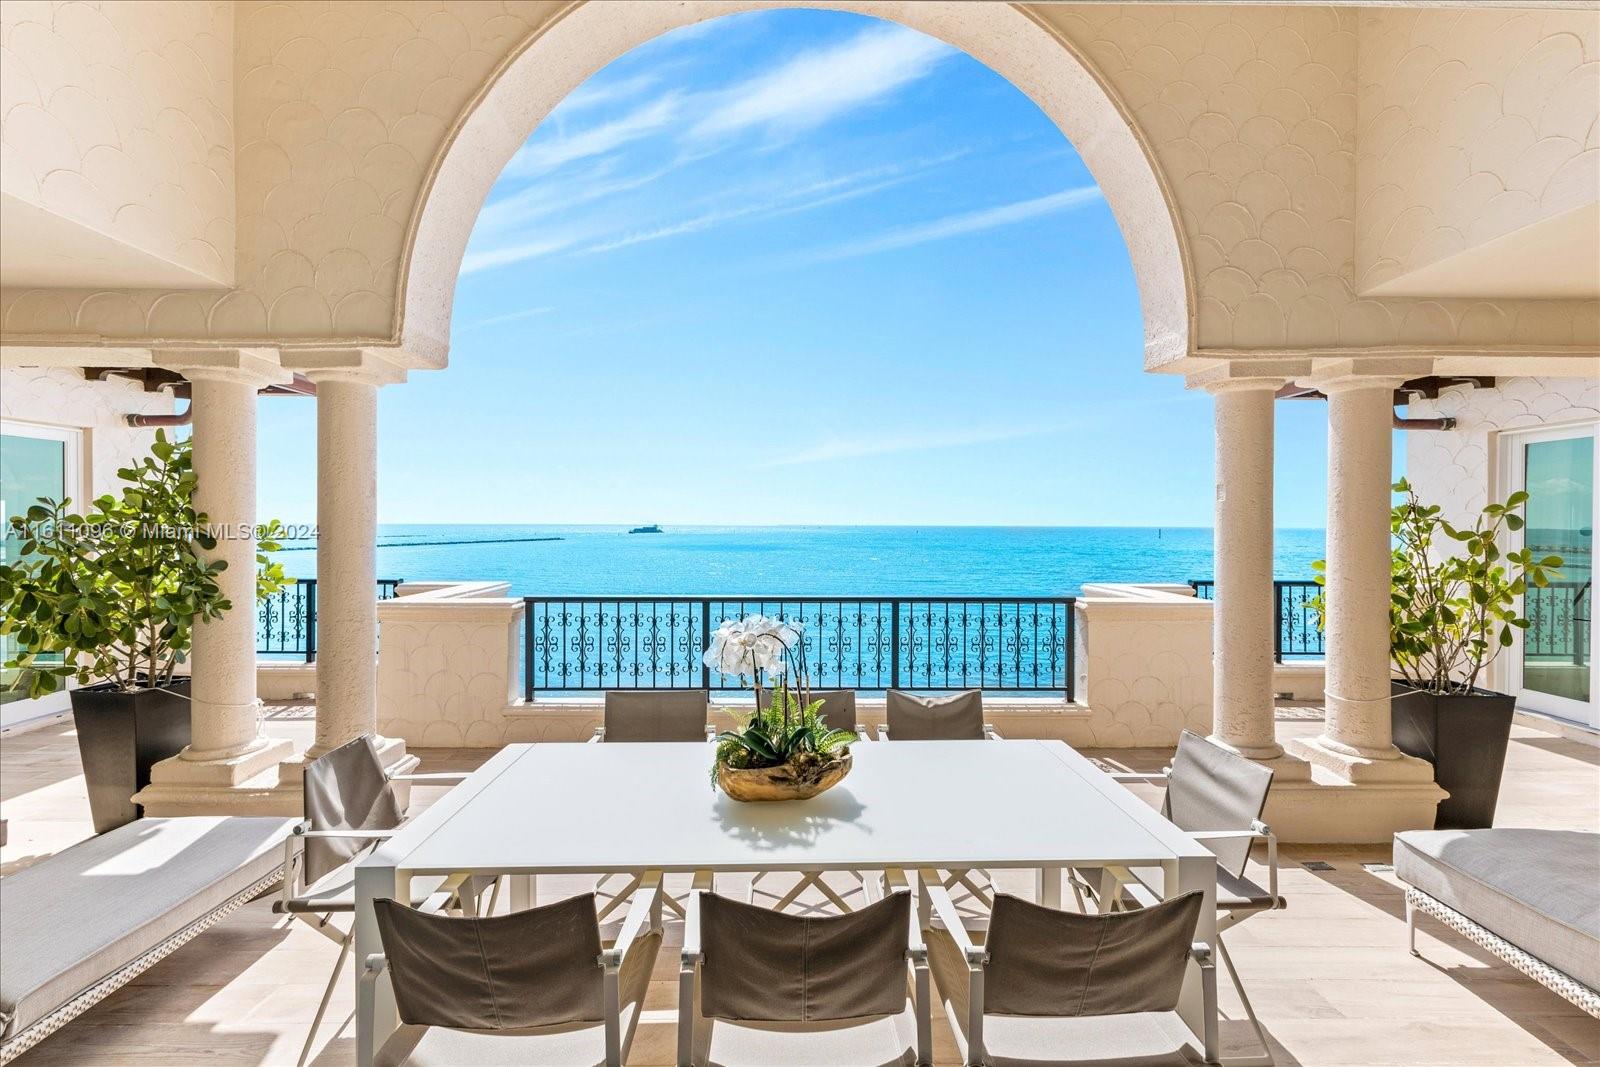 This one of a kind newly renovated gem greets you with 20 foot ceilings, a skylight and ocean direct views of the Atlantic ocean, government cut and Miami downtown. This magnificent Penthouse showcases: a private elevator, east & west views with expansive terraces, 5 bedrooms + 1 staff bedroom, 7.5 bathrooms, marble floors throughout, 10 ft gas fireplace, formal dining room, a state of the art kitchen with top of the line appliances, butler's pantry, impact glass doors and many more features. The PH includes: 8 parking spaces, 1 golf cart, 3 assigned golf cart parking spaces and 1 storage. Experience Fisher Island living in this exceptional masterpiece! Easy to show.